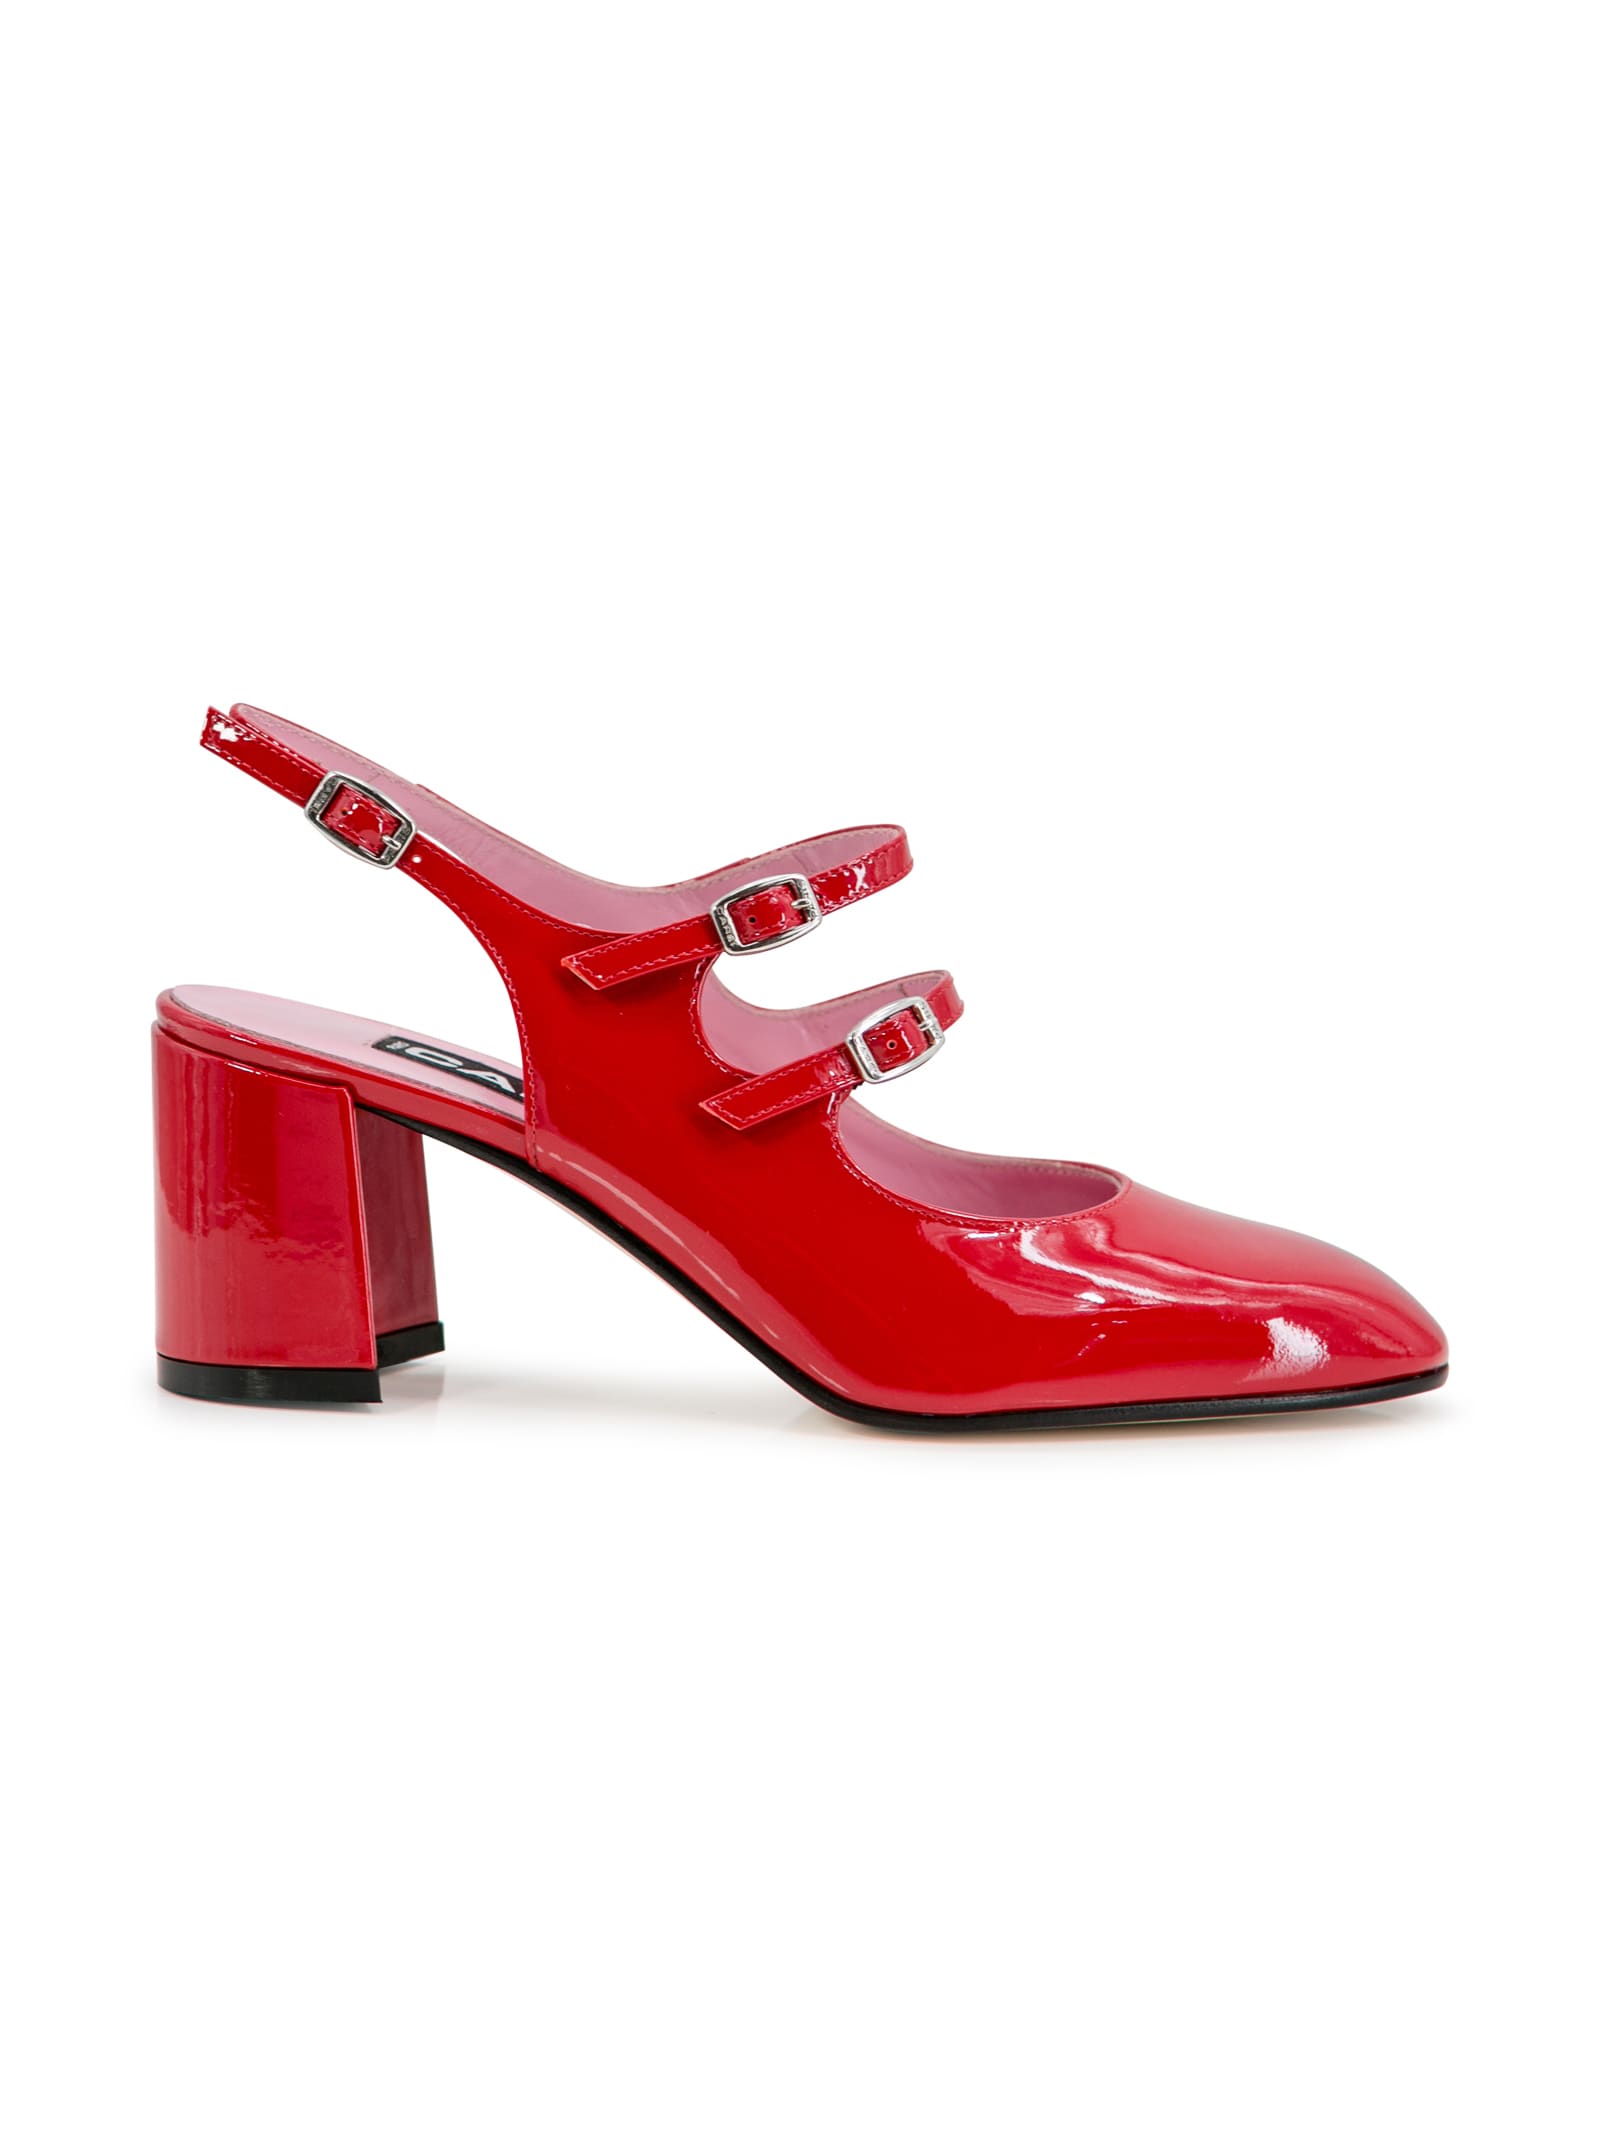 Carel 70mm Patent Leather Pumps In Red